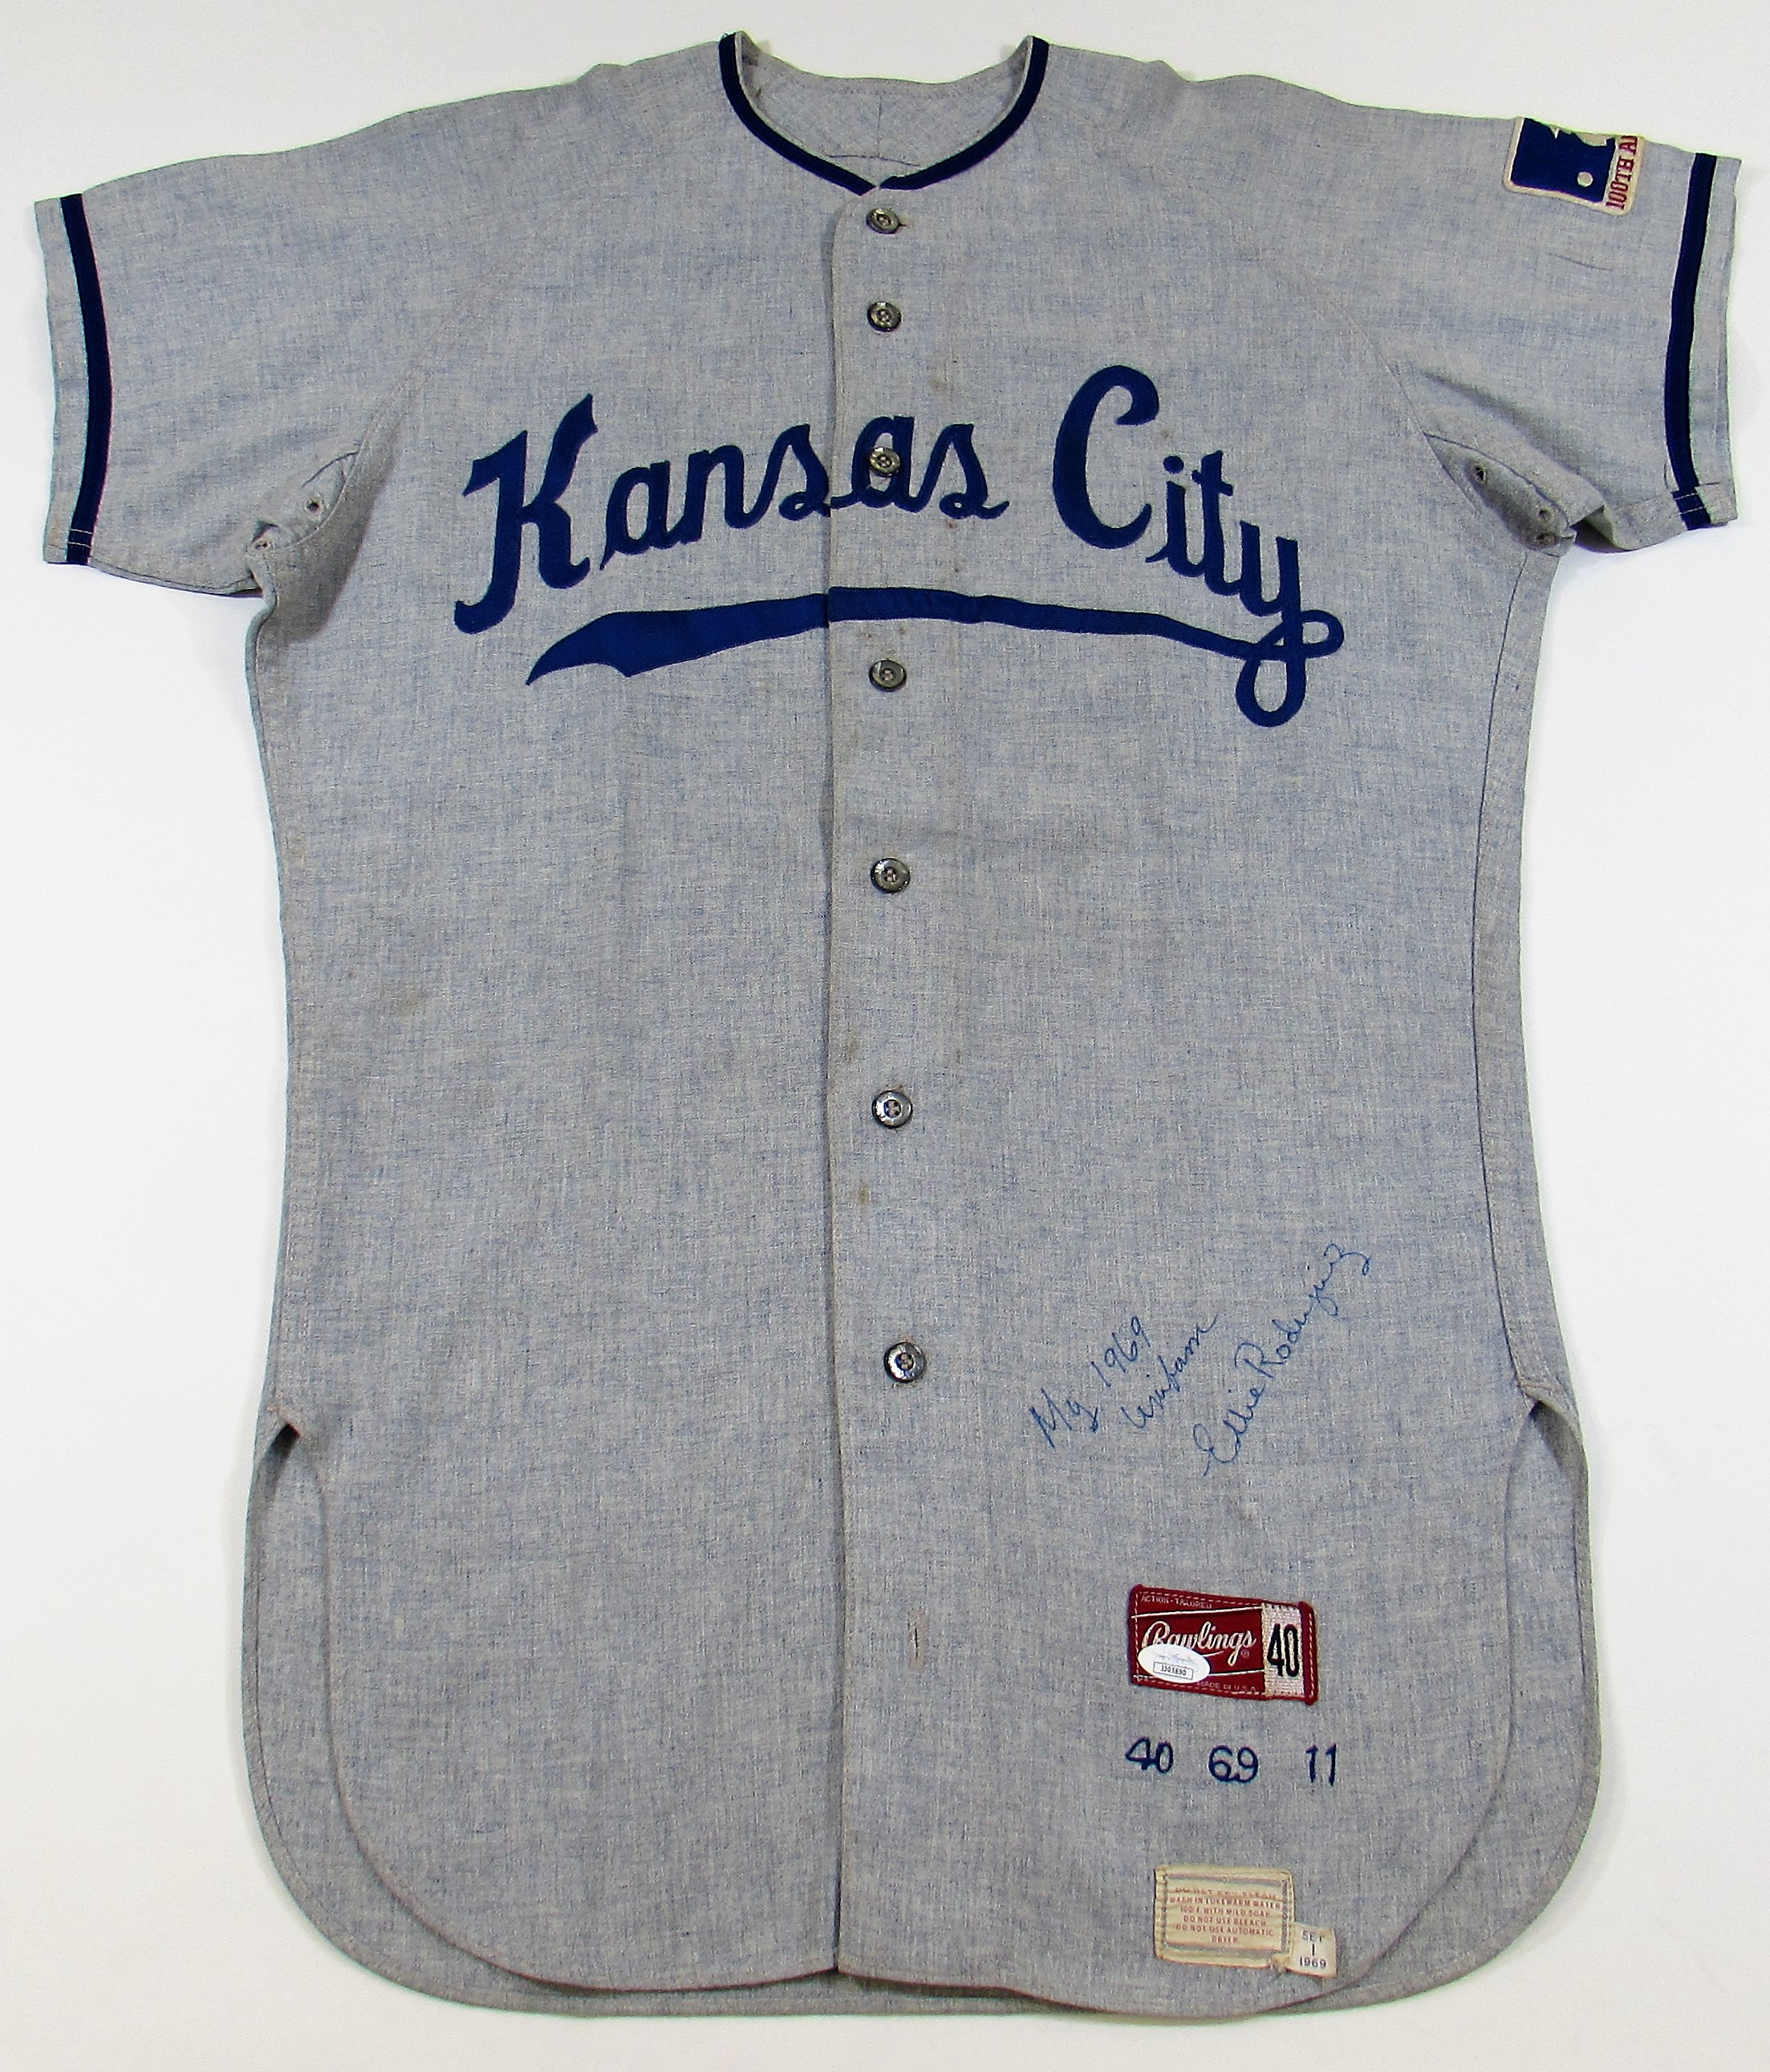 royals signed jersey